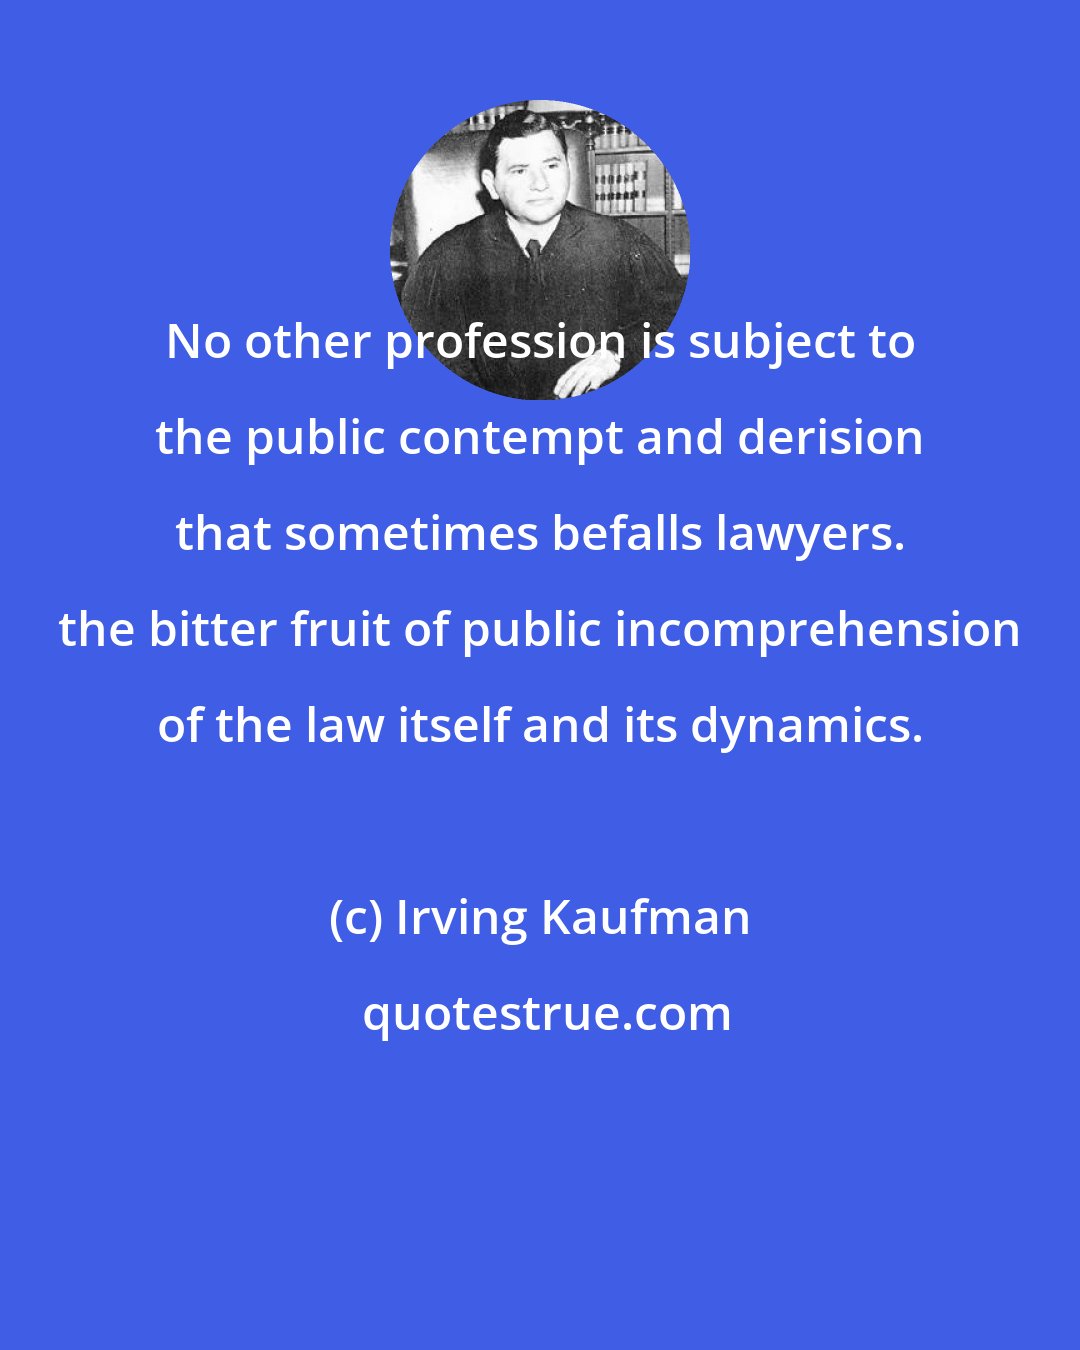 Irving Kaufman: No other profession is subject to the public contempt and derision that sometimes befalls lawyers. the bitter fruit of public incomprehension of the law itself and its dynamics.